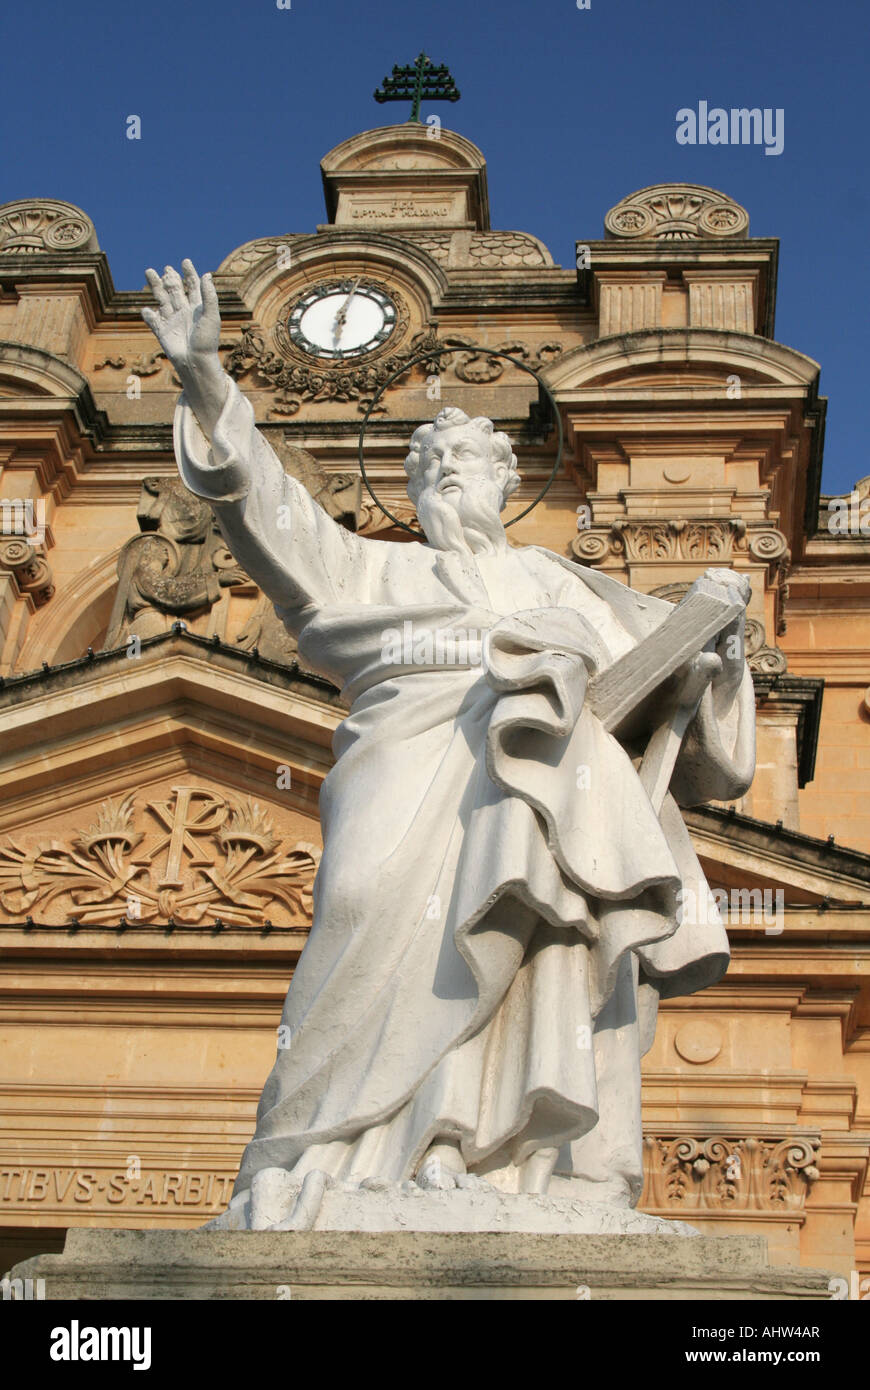 Statue of St Peter outside the basilica (church) of Nadur, Gozo, Malta. The Roman Catholic religion and Christianity in Europe. Stock Photo